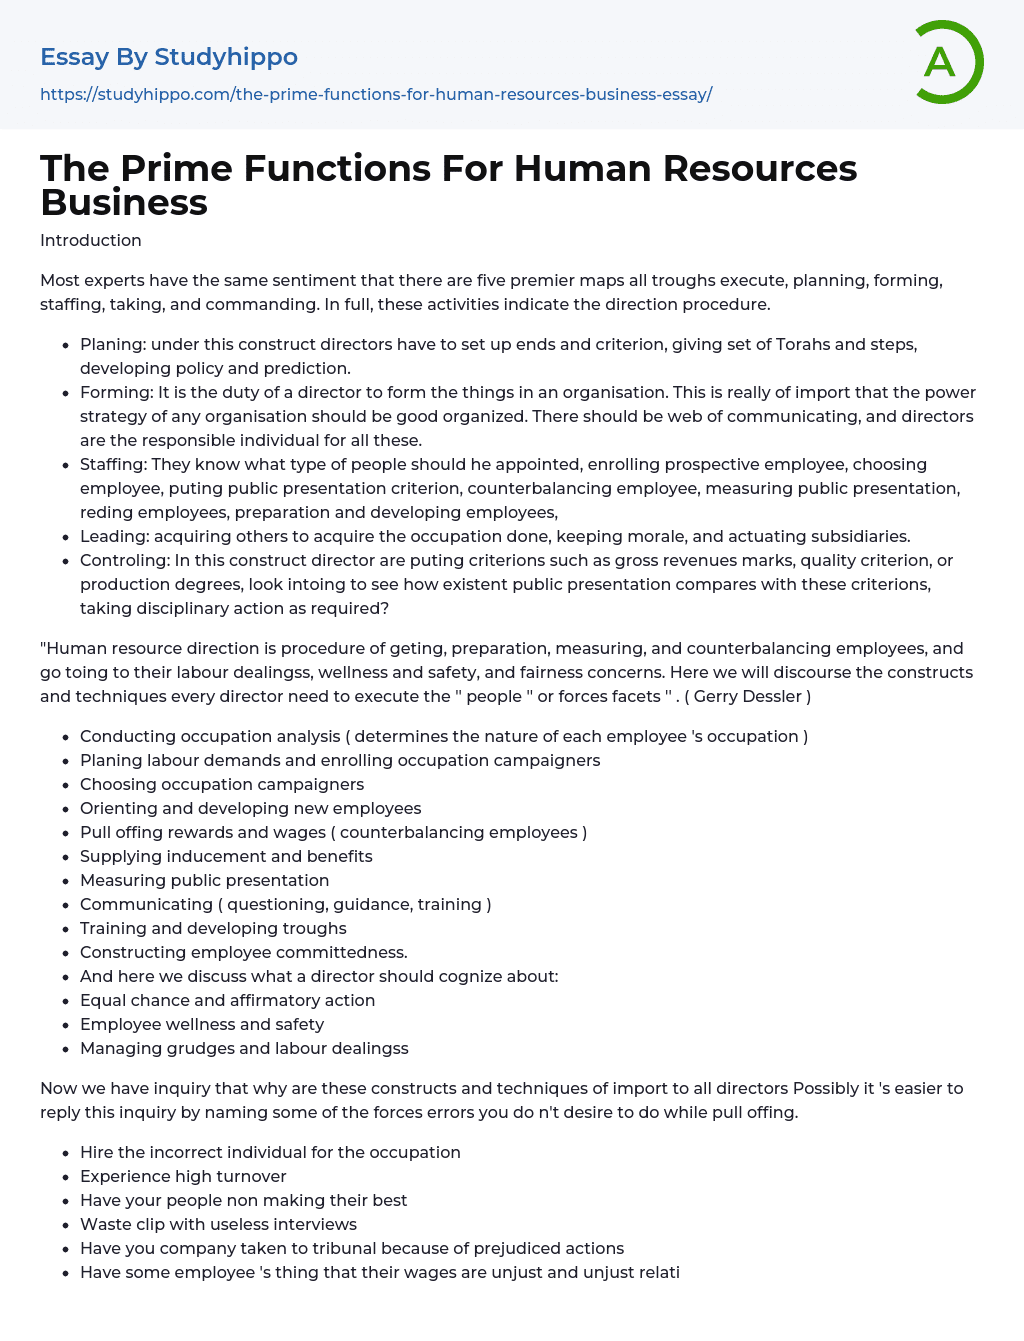 The Prime Functions For Human Resources Business Essay Example